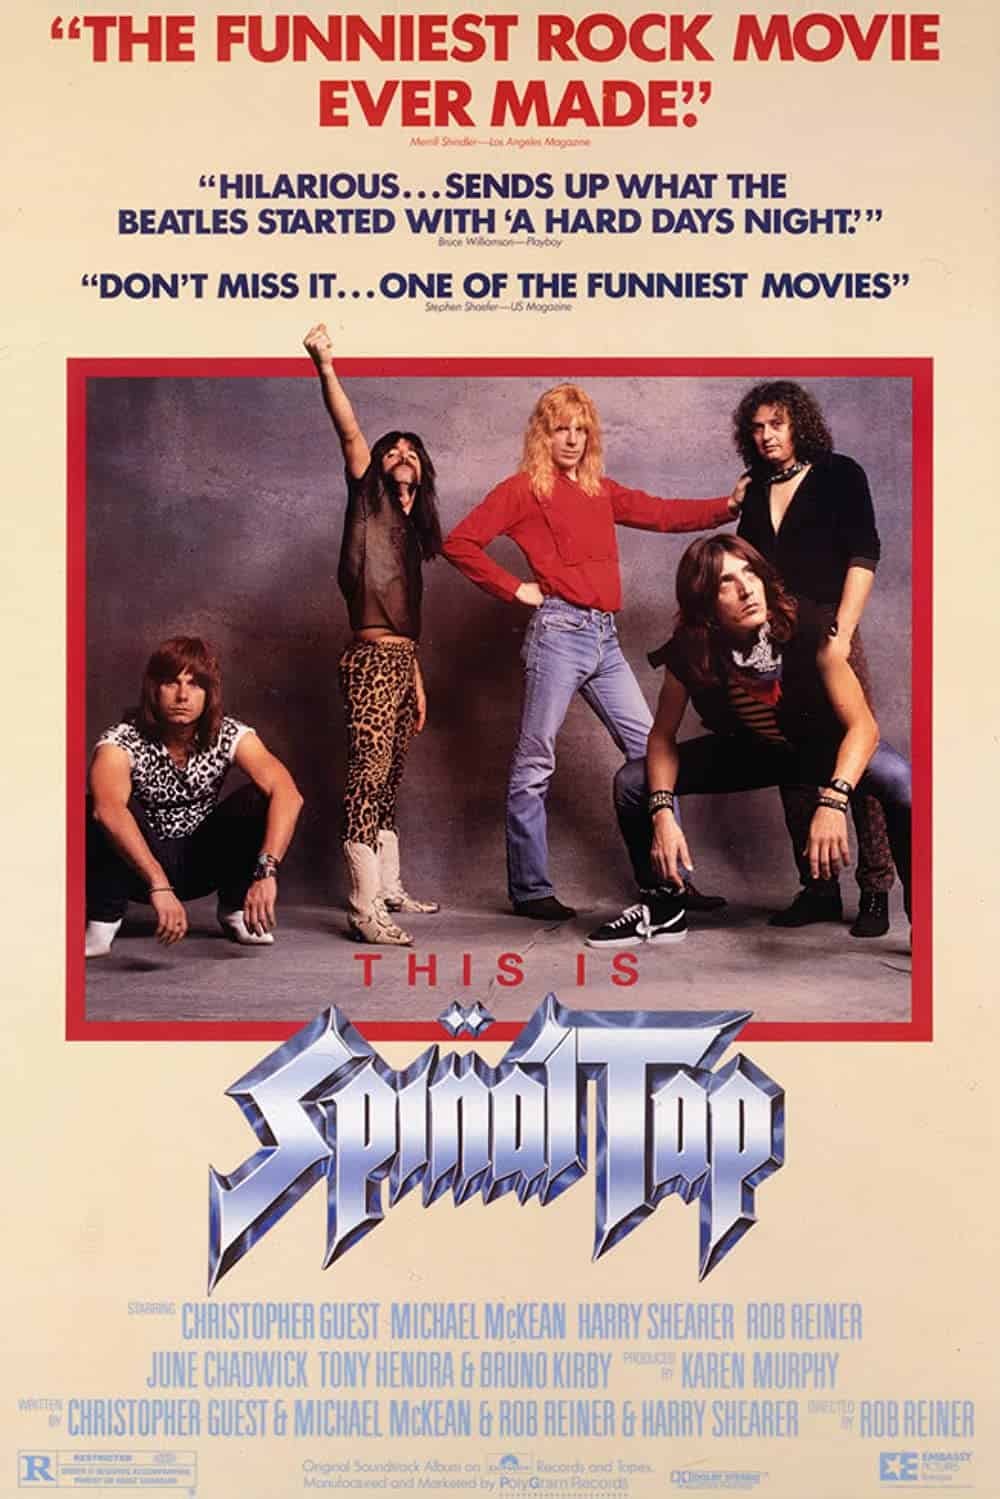 This is Spinal Tap (1984) Best Rock Movies to Watch